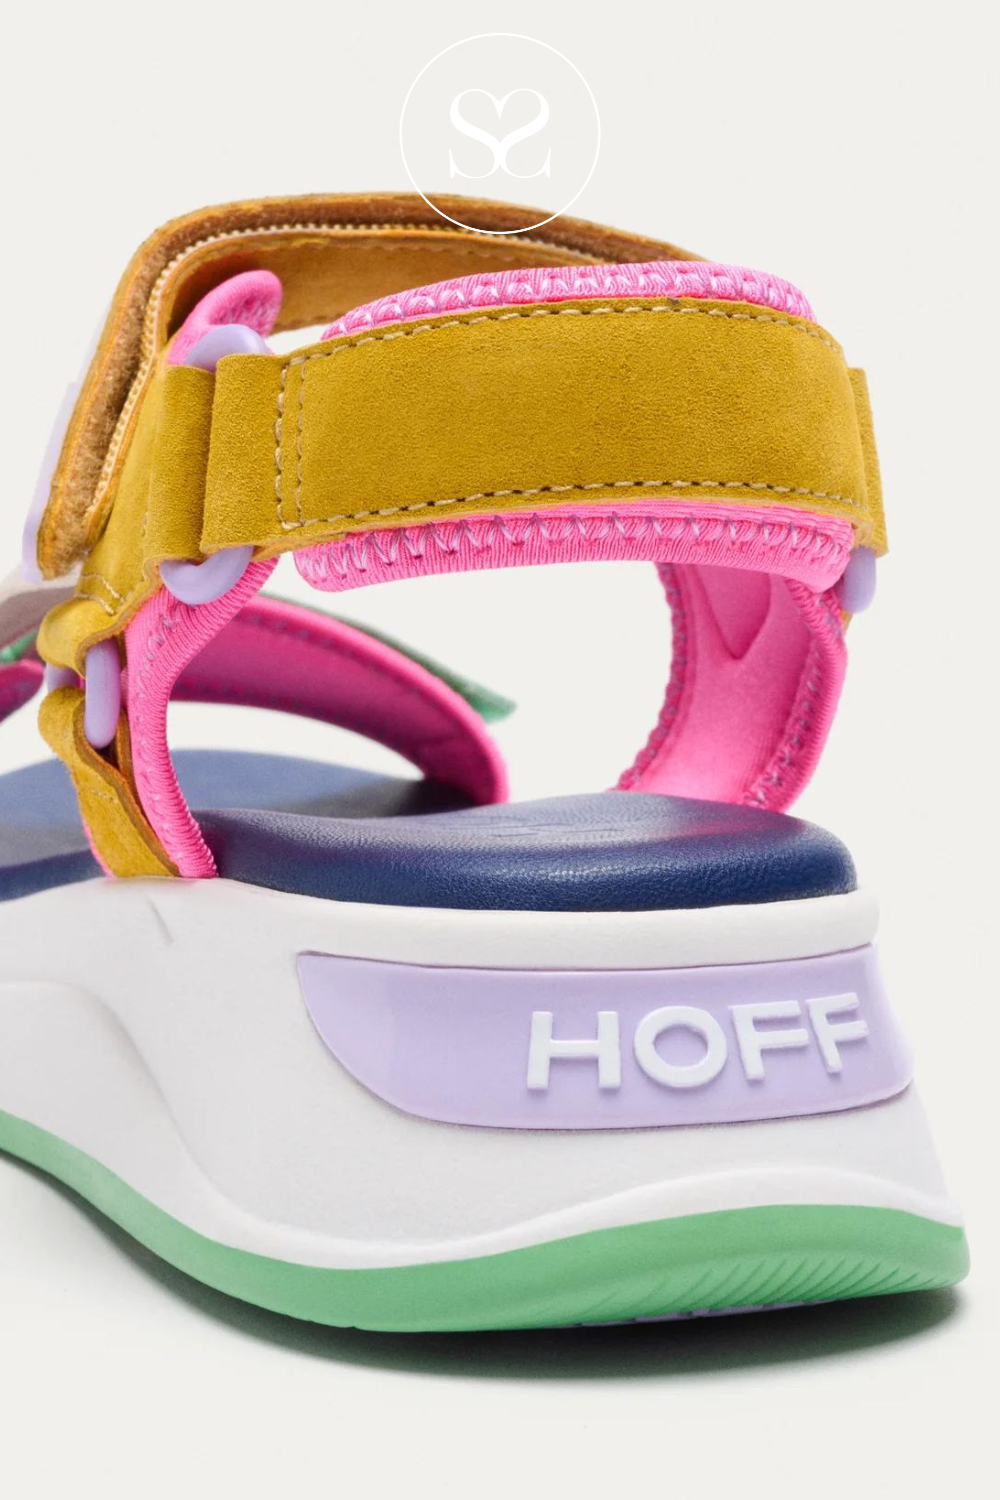 HOFF PHUKET LEATHER/SUEDE MULTI WALKING SANDALS WITH VELCRO STRAP FASTENING.